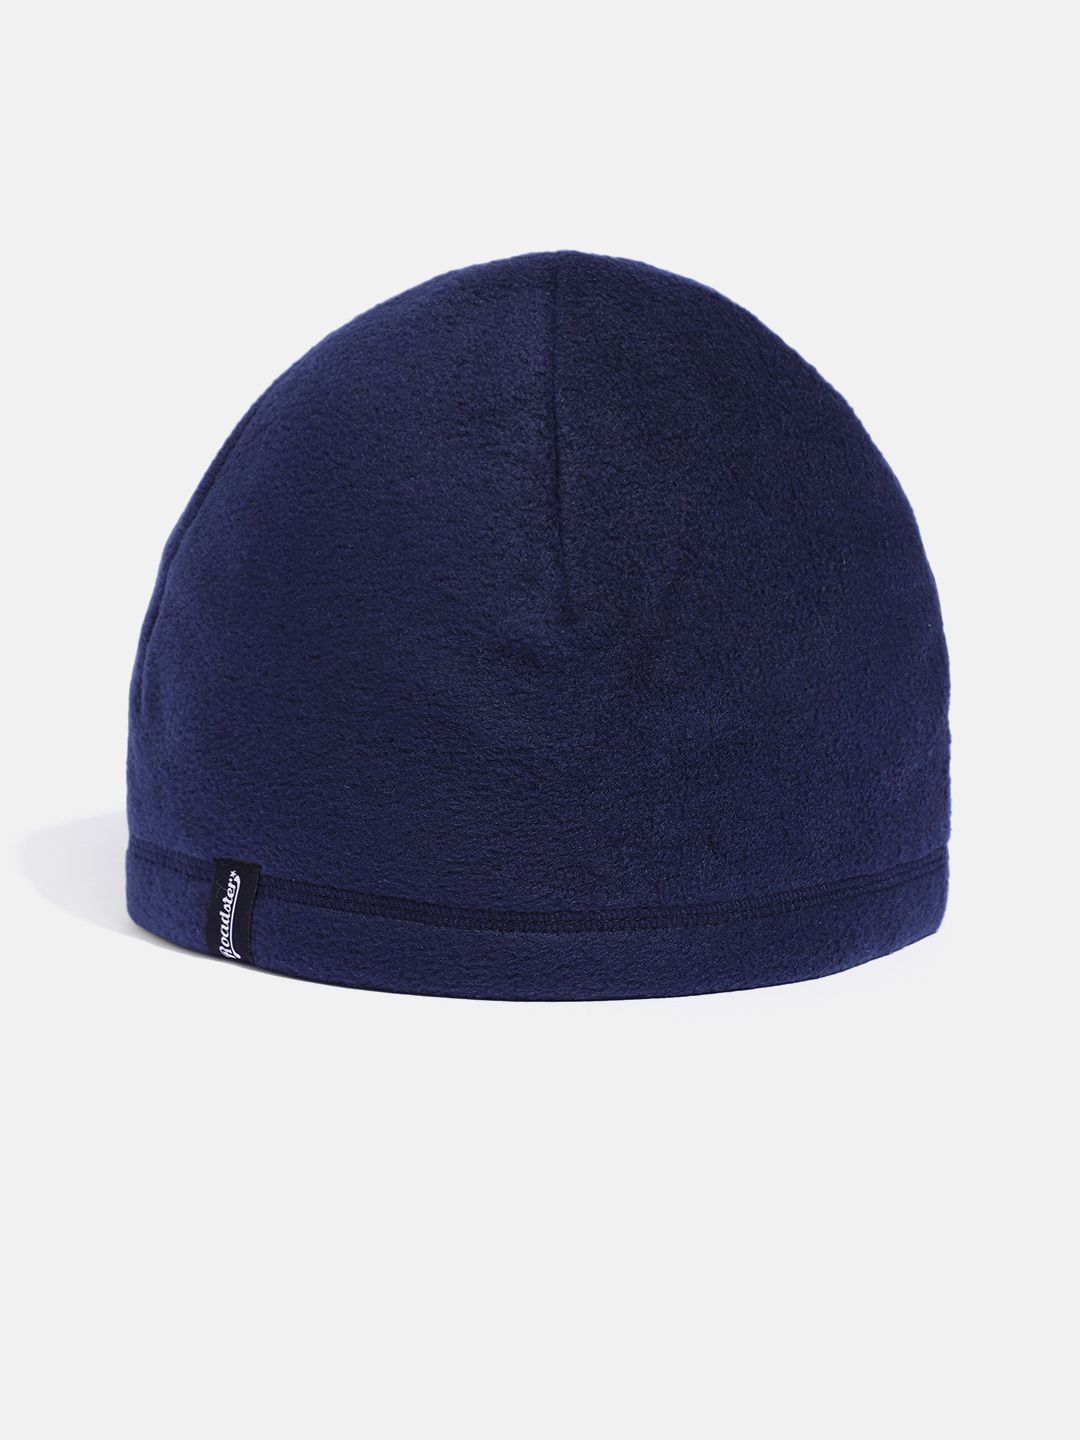 Roadster Unisex Navy Blue Acrylic Beanie Price in India